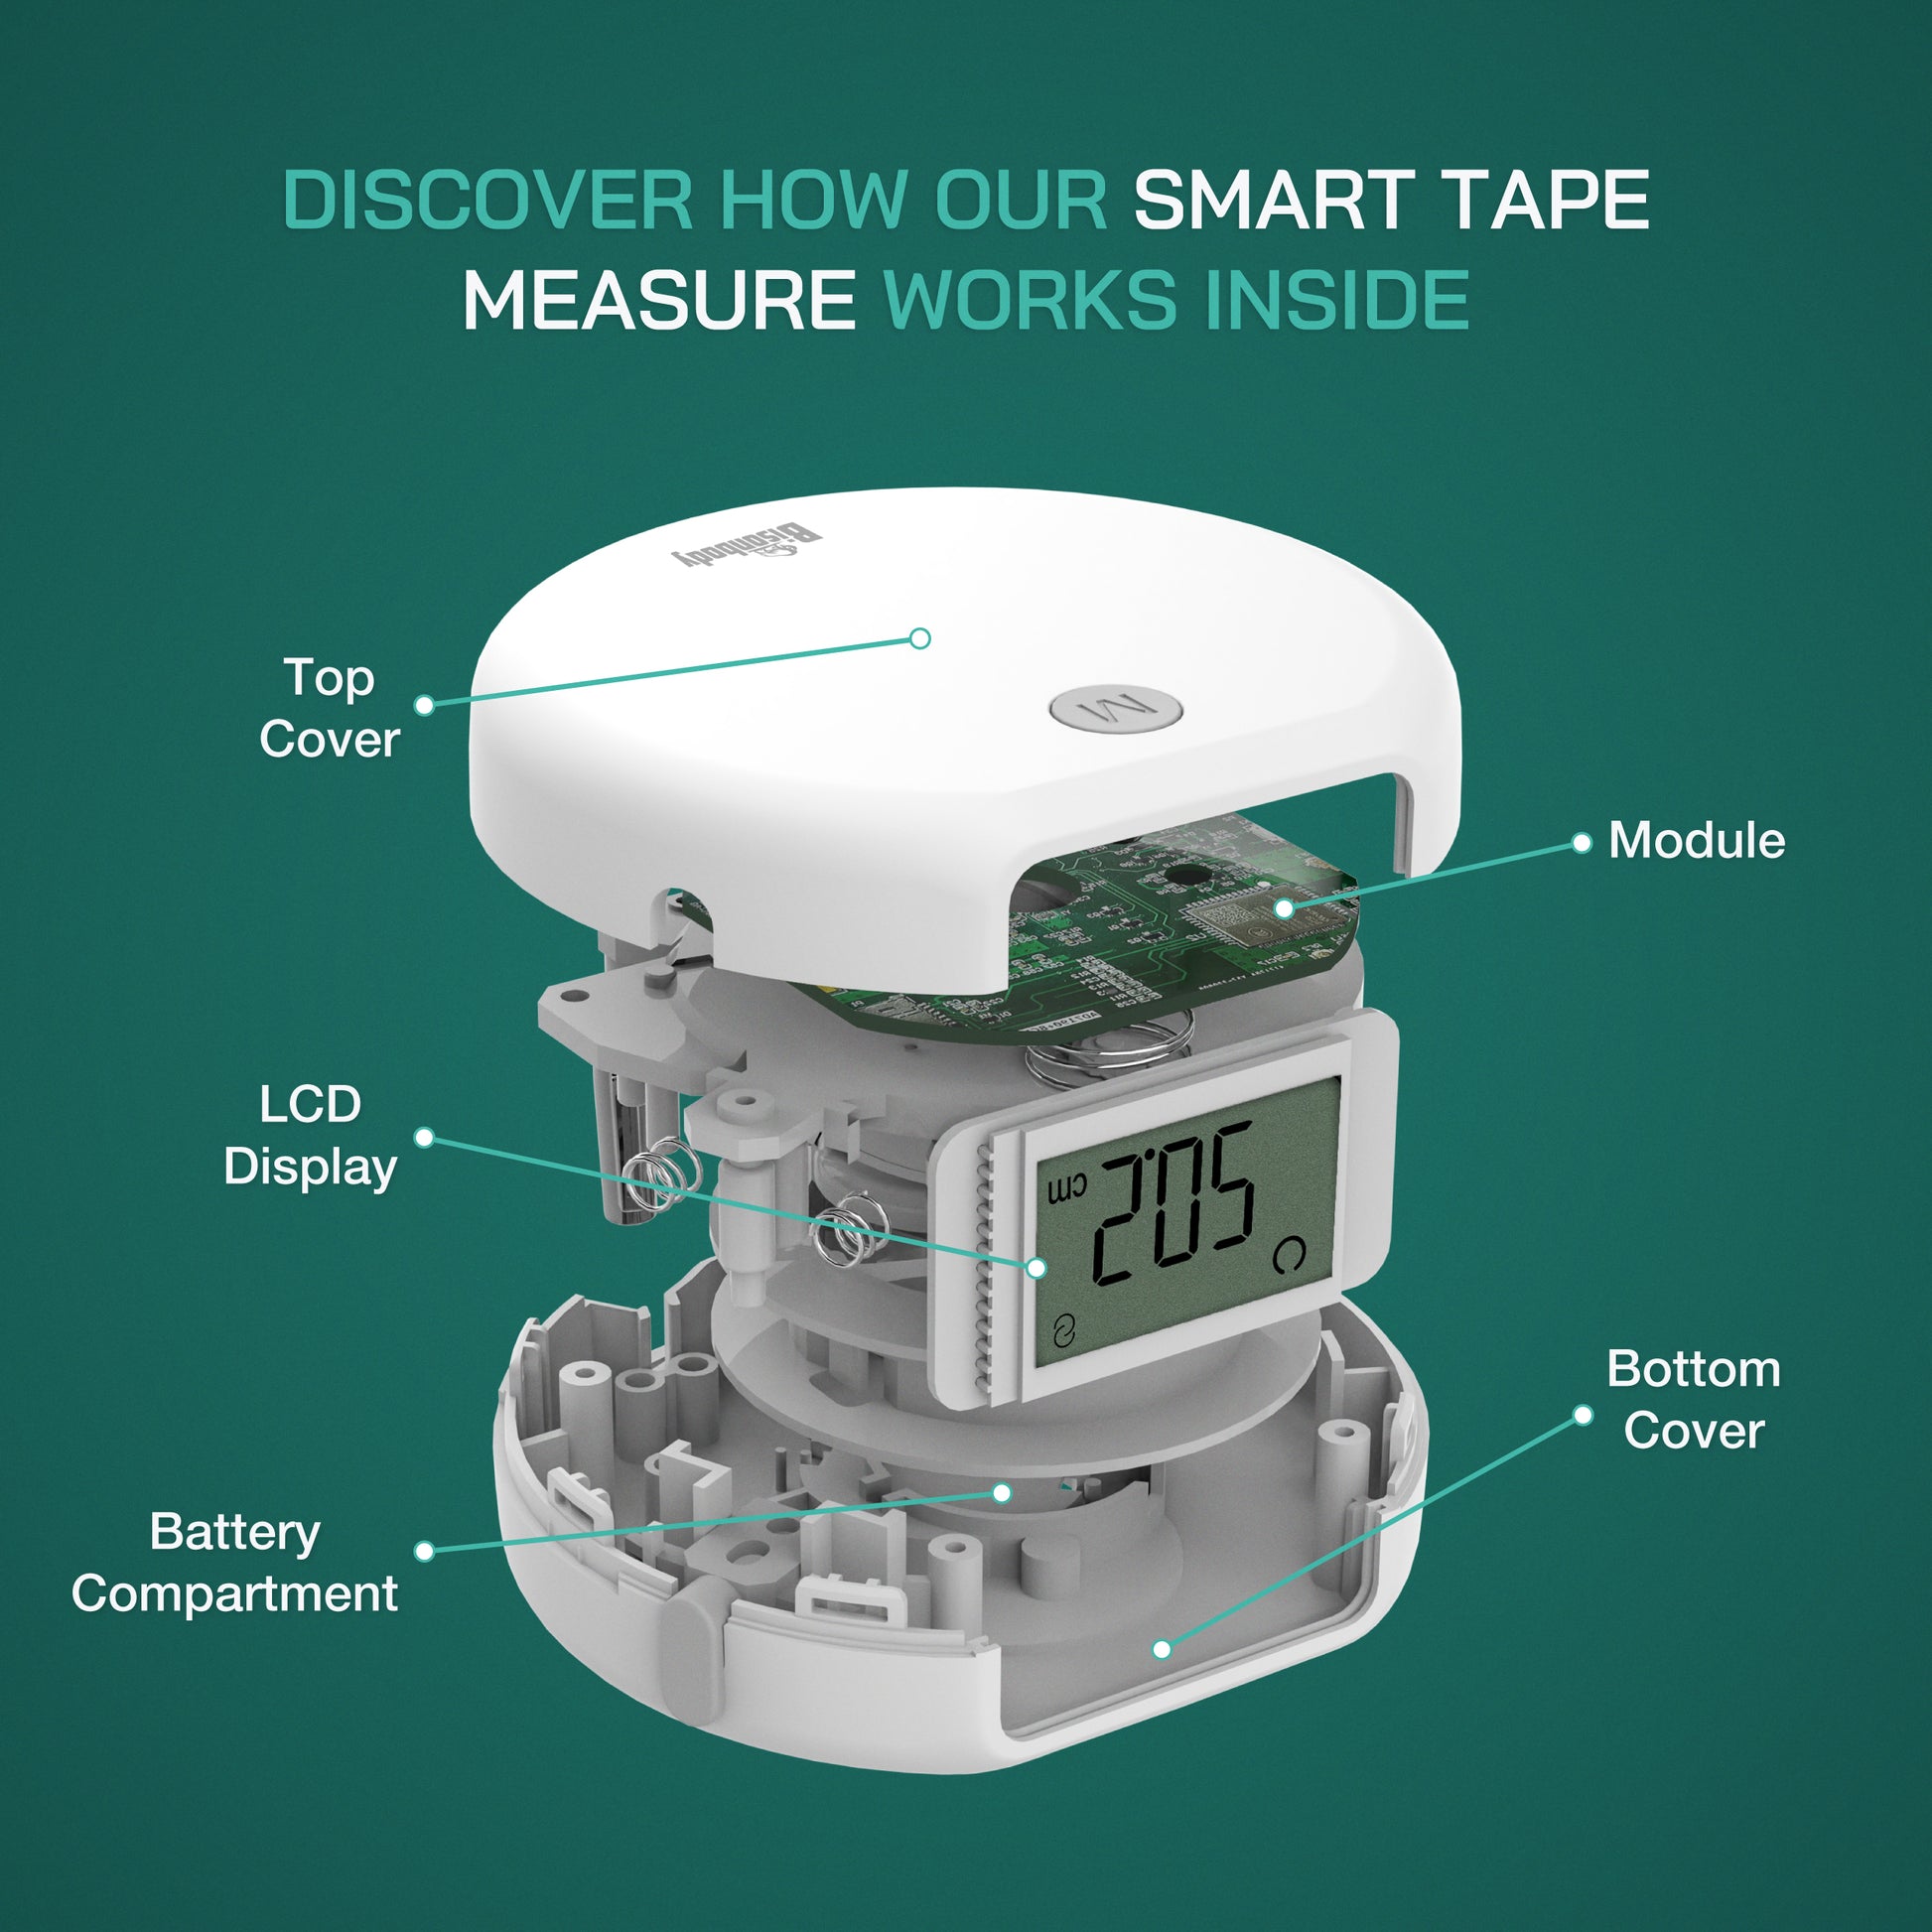 PIE is a Smart Tape Measure for Your Body